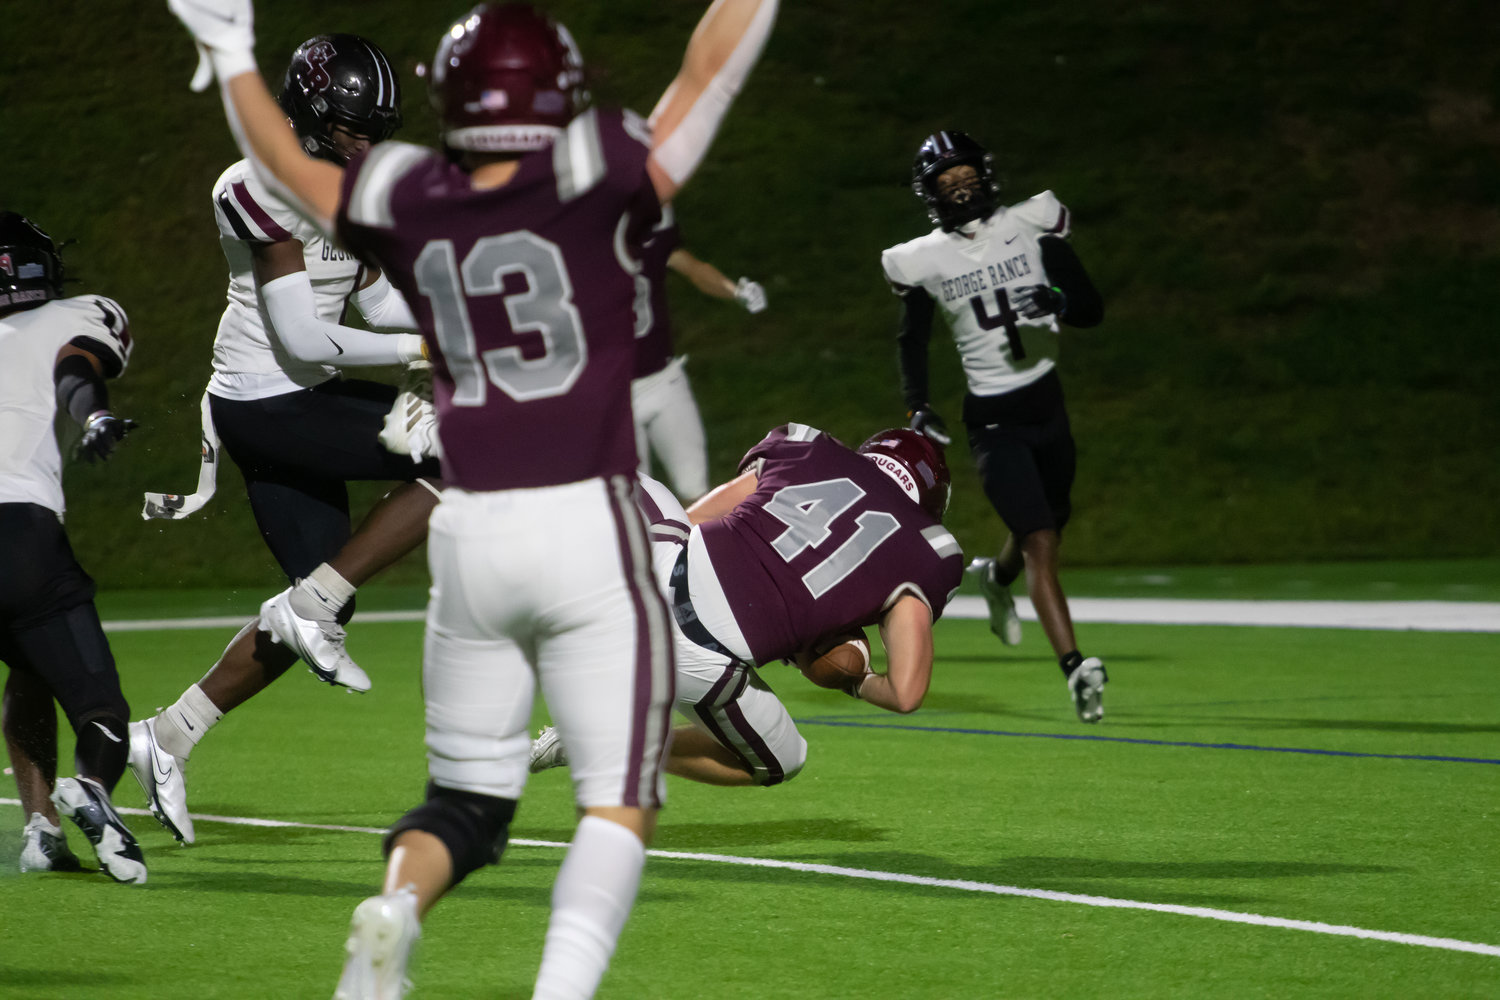 Colten Michalec scores a touchdown during Friday's game between Cinco Ranch and George Ranch at Rhodes Stadium.